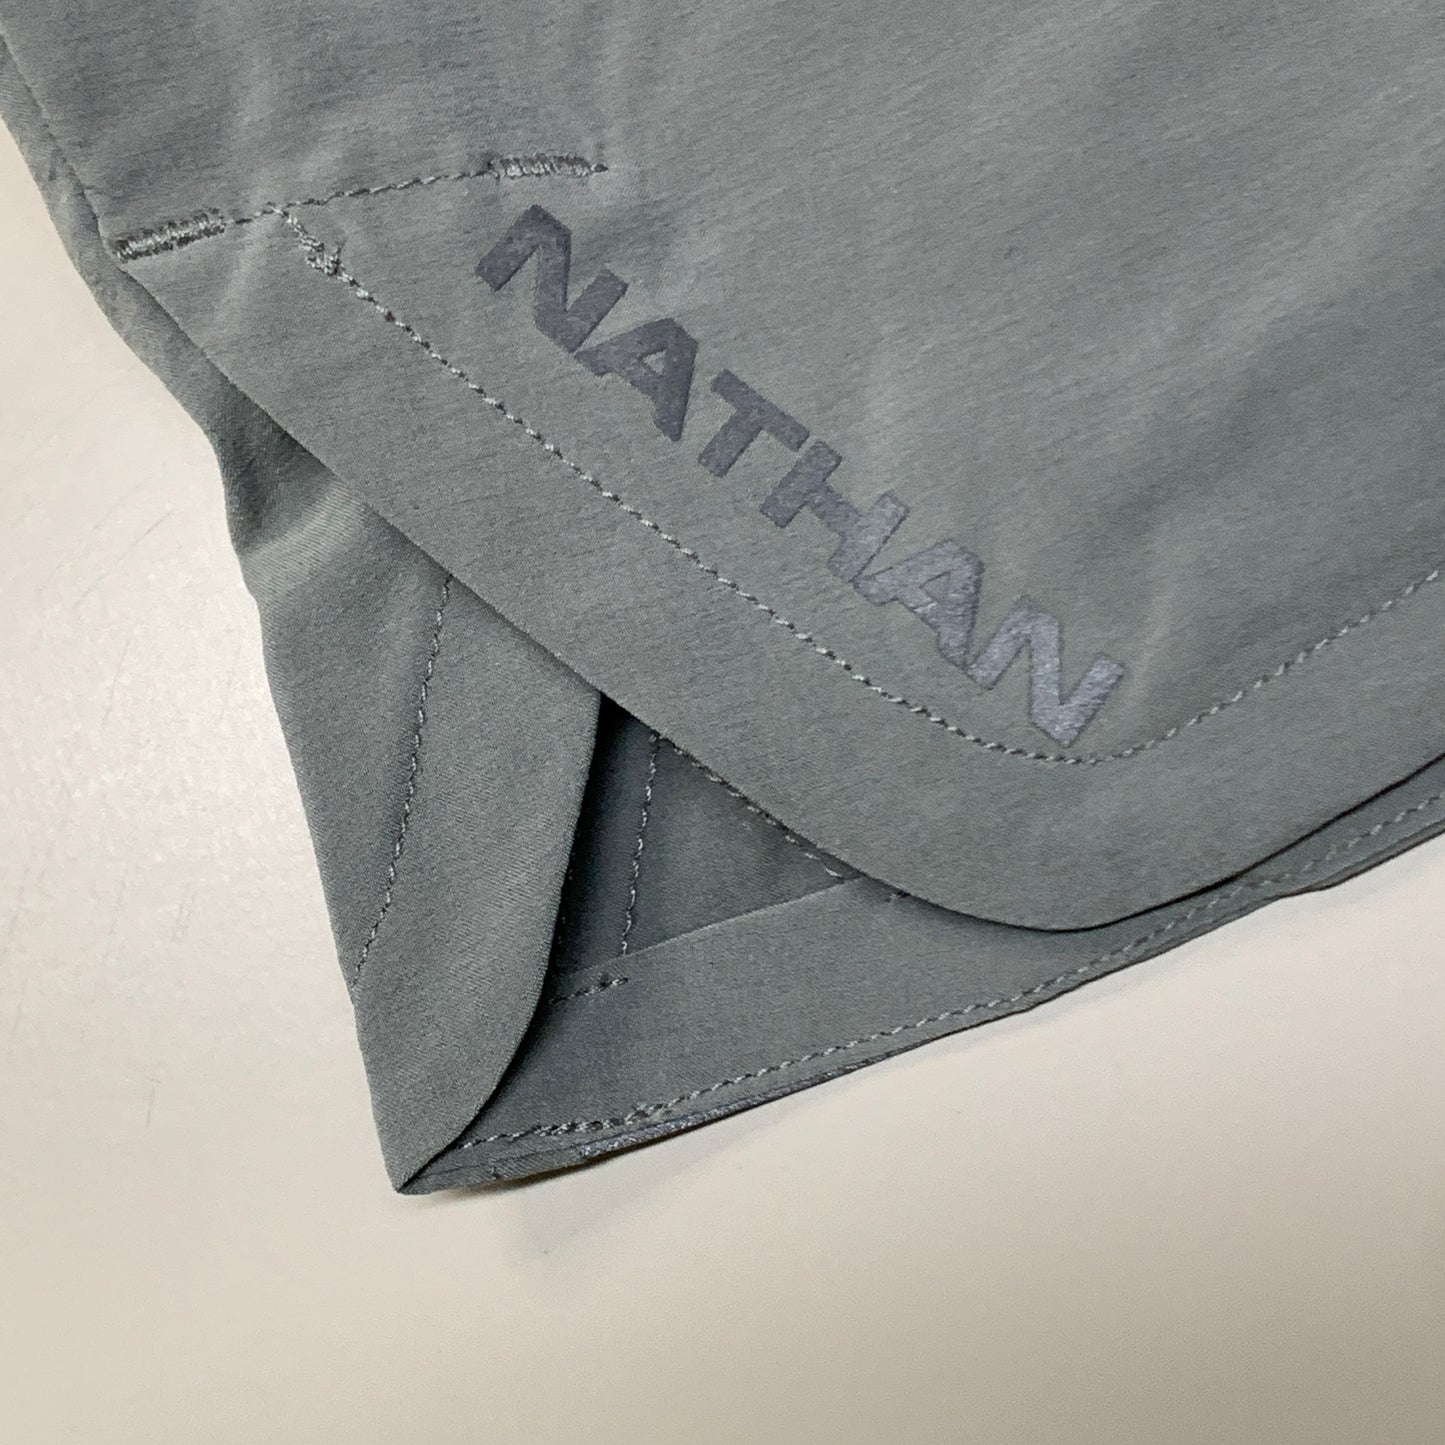 NATHAN Front Runner Shorts 5" Inseam Men's Monument Grey SZ S NS70100-80128-S